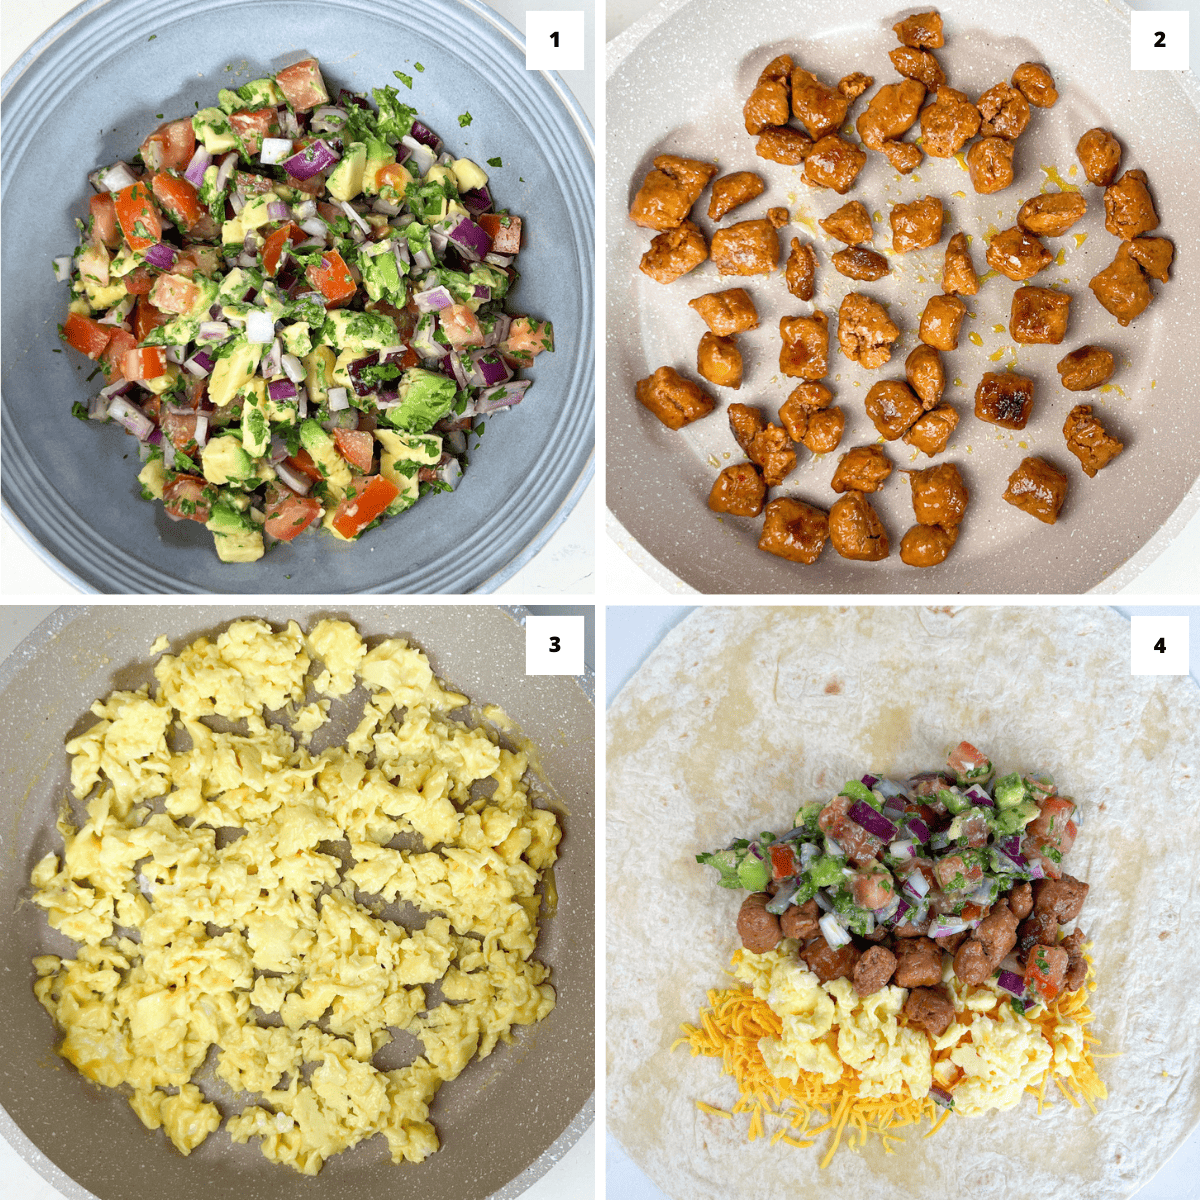 Steps needed to make the Easy Scrambled Egg and Sausage Wrap recipe. 1. mix the uncooked ingredients in a bowl. 2. Cook sausages. 3. Melt cheddar cheese. 4. spread all ingredients on wrap and yum!